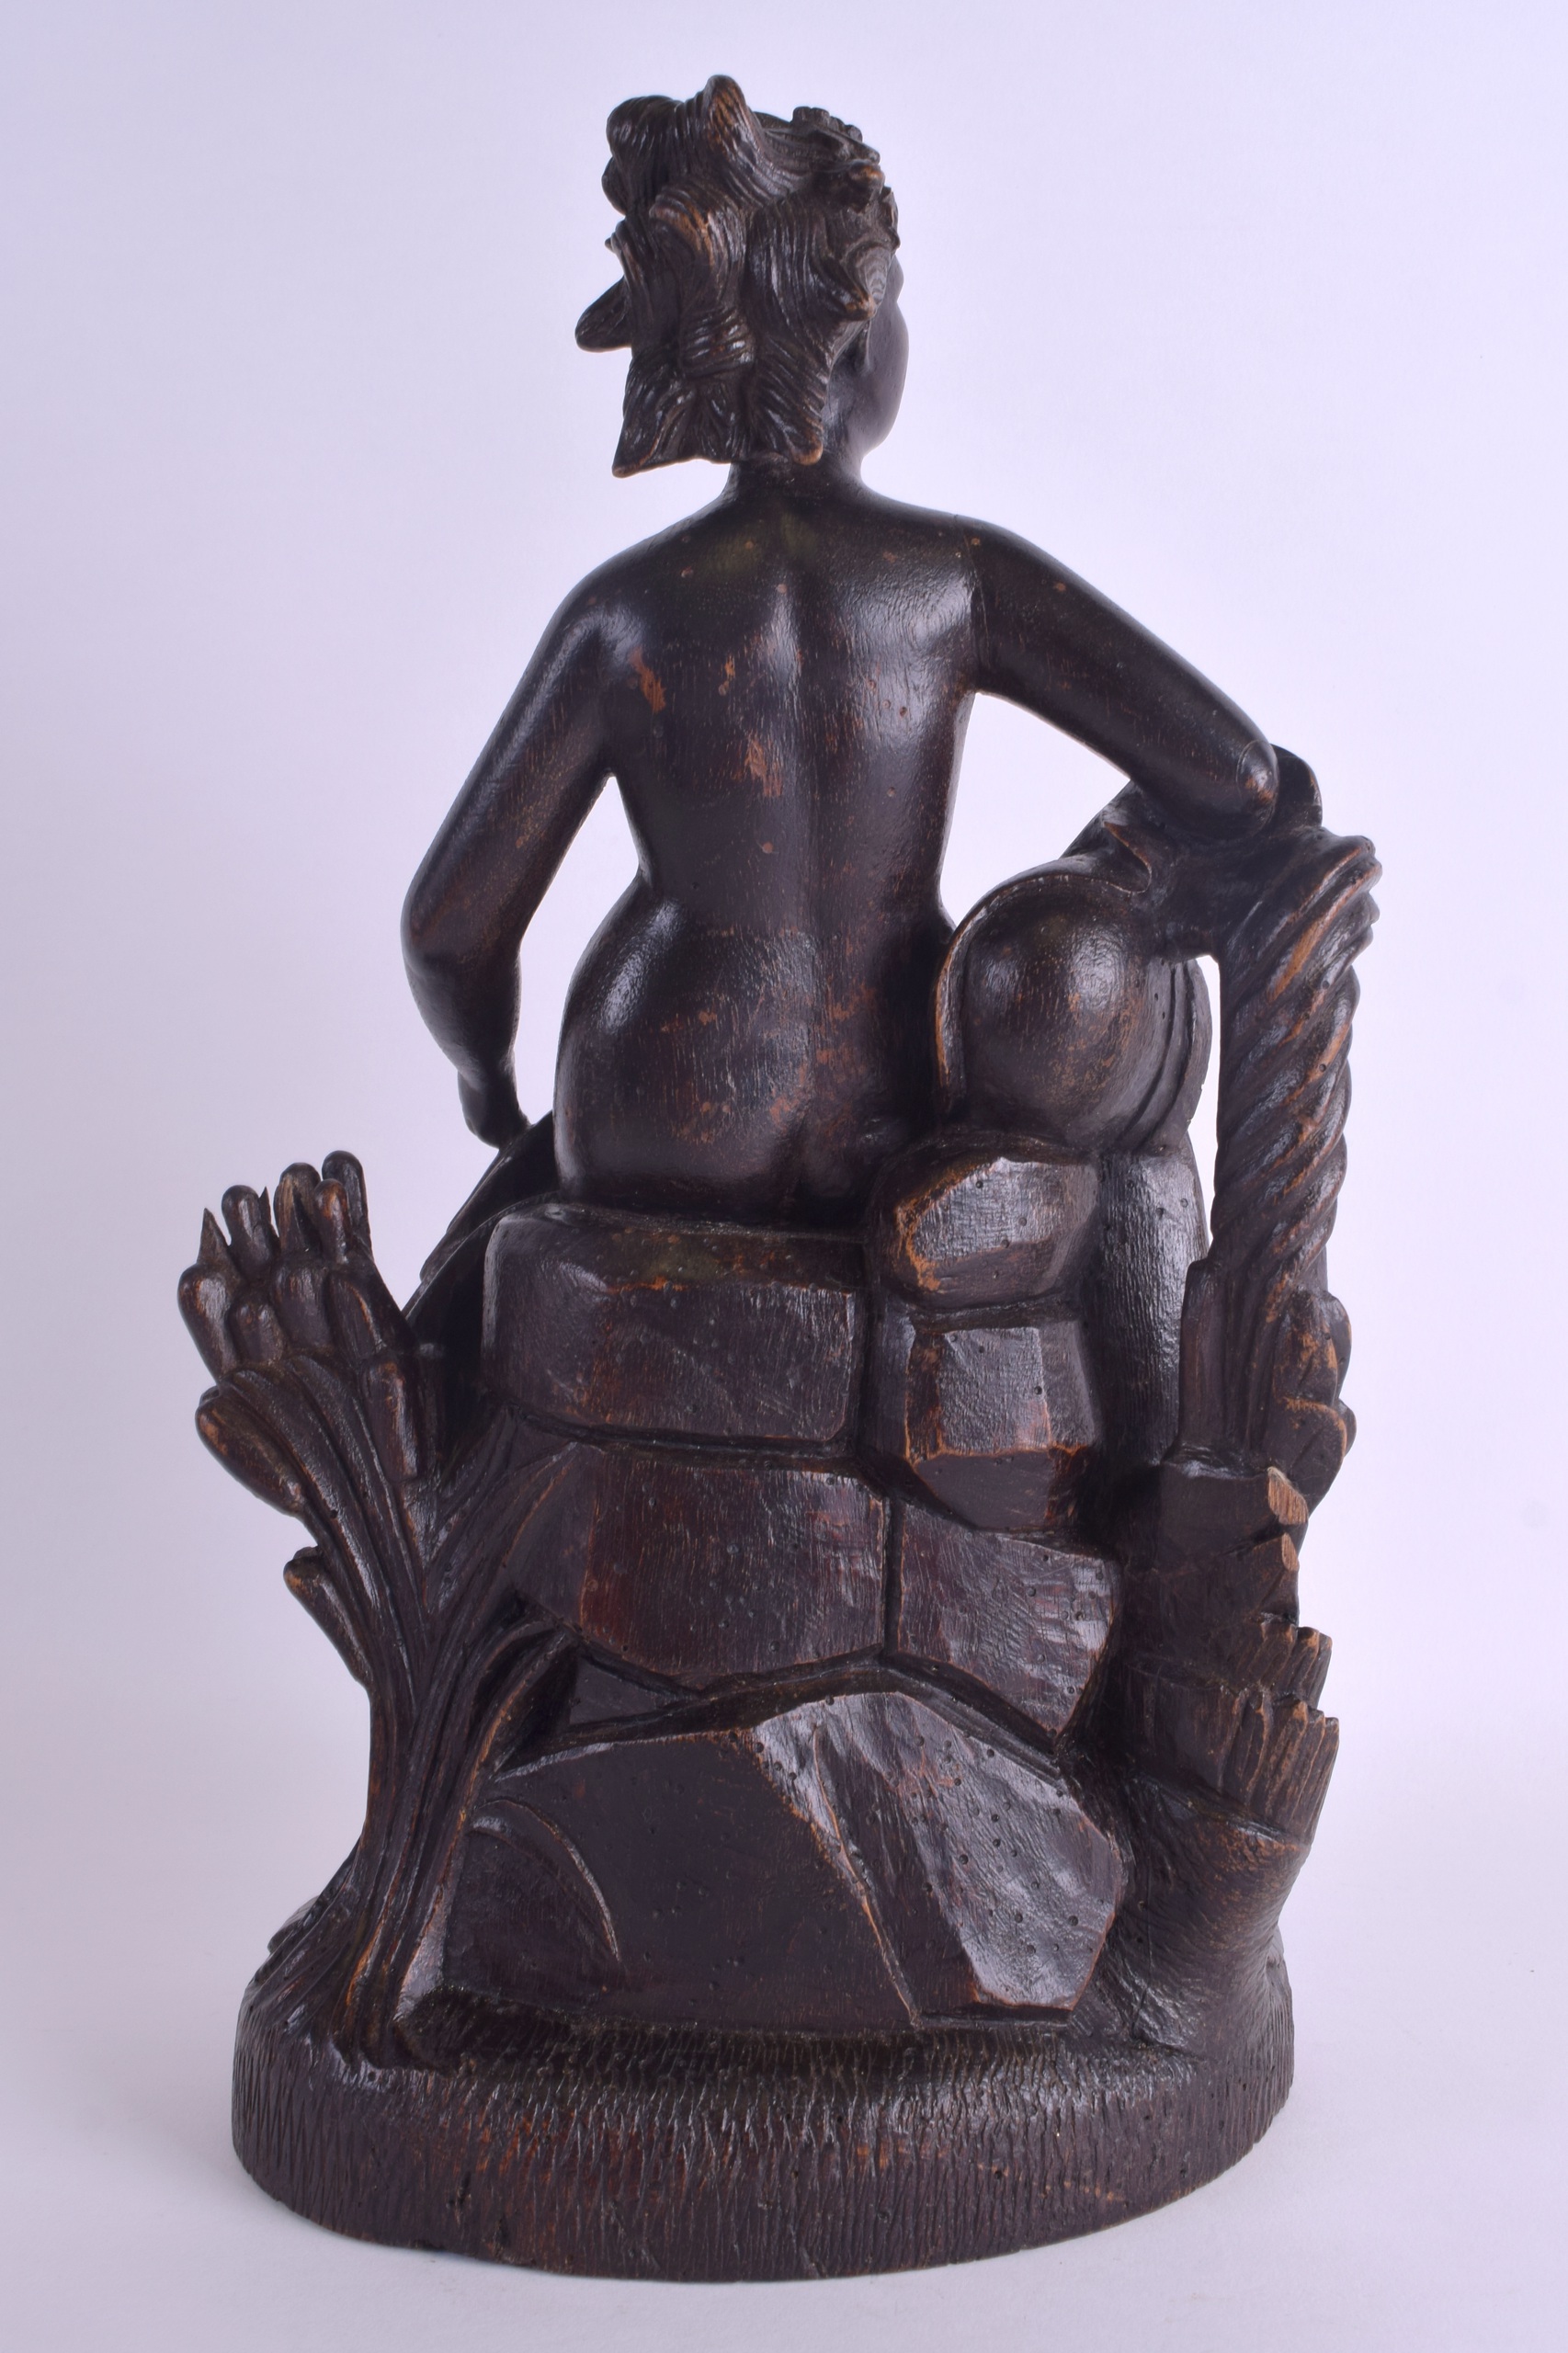 A LARGE 18TH/19TH CENTURY CONTINENTAL CARVED WOOD FIGURE OF A FEMALE possibly a representation of - Image 2 of 3